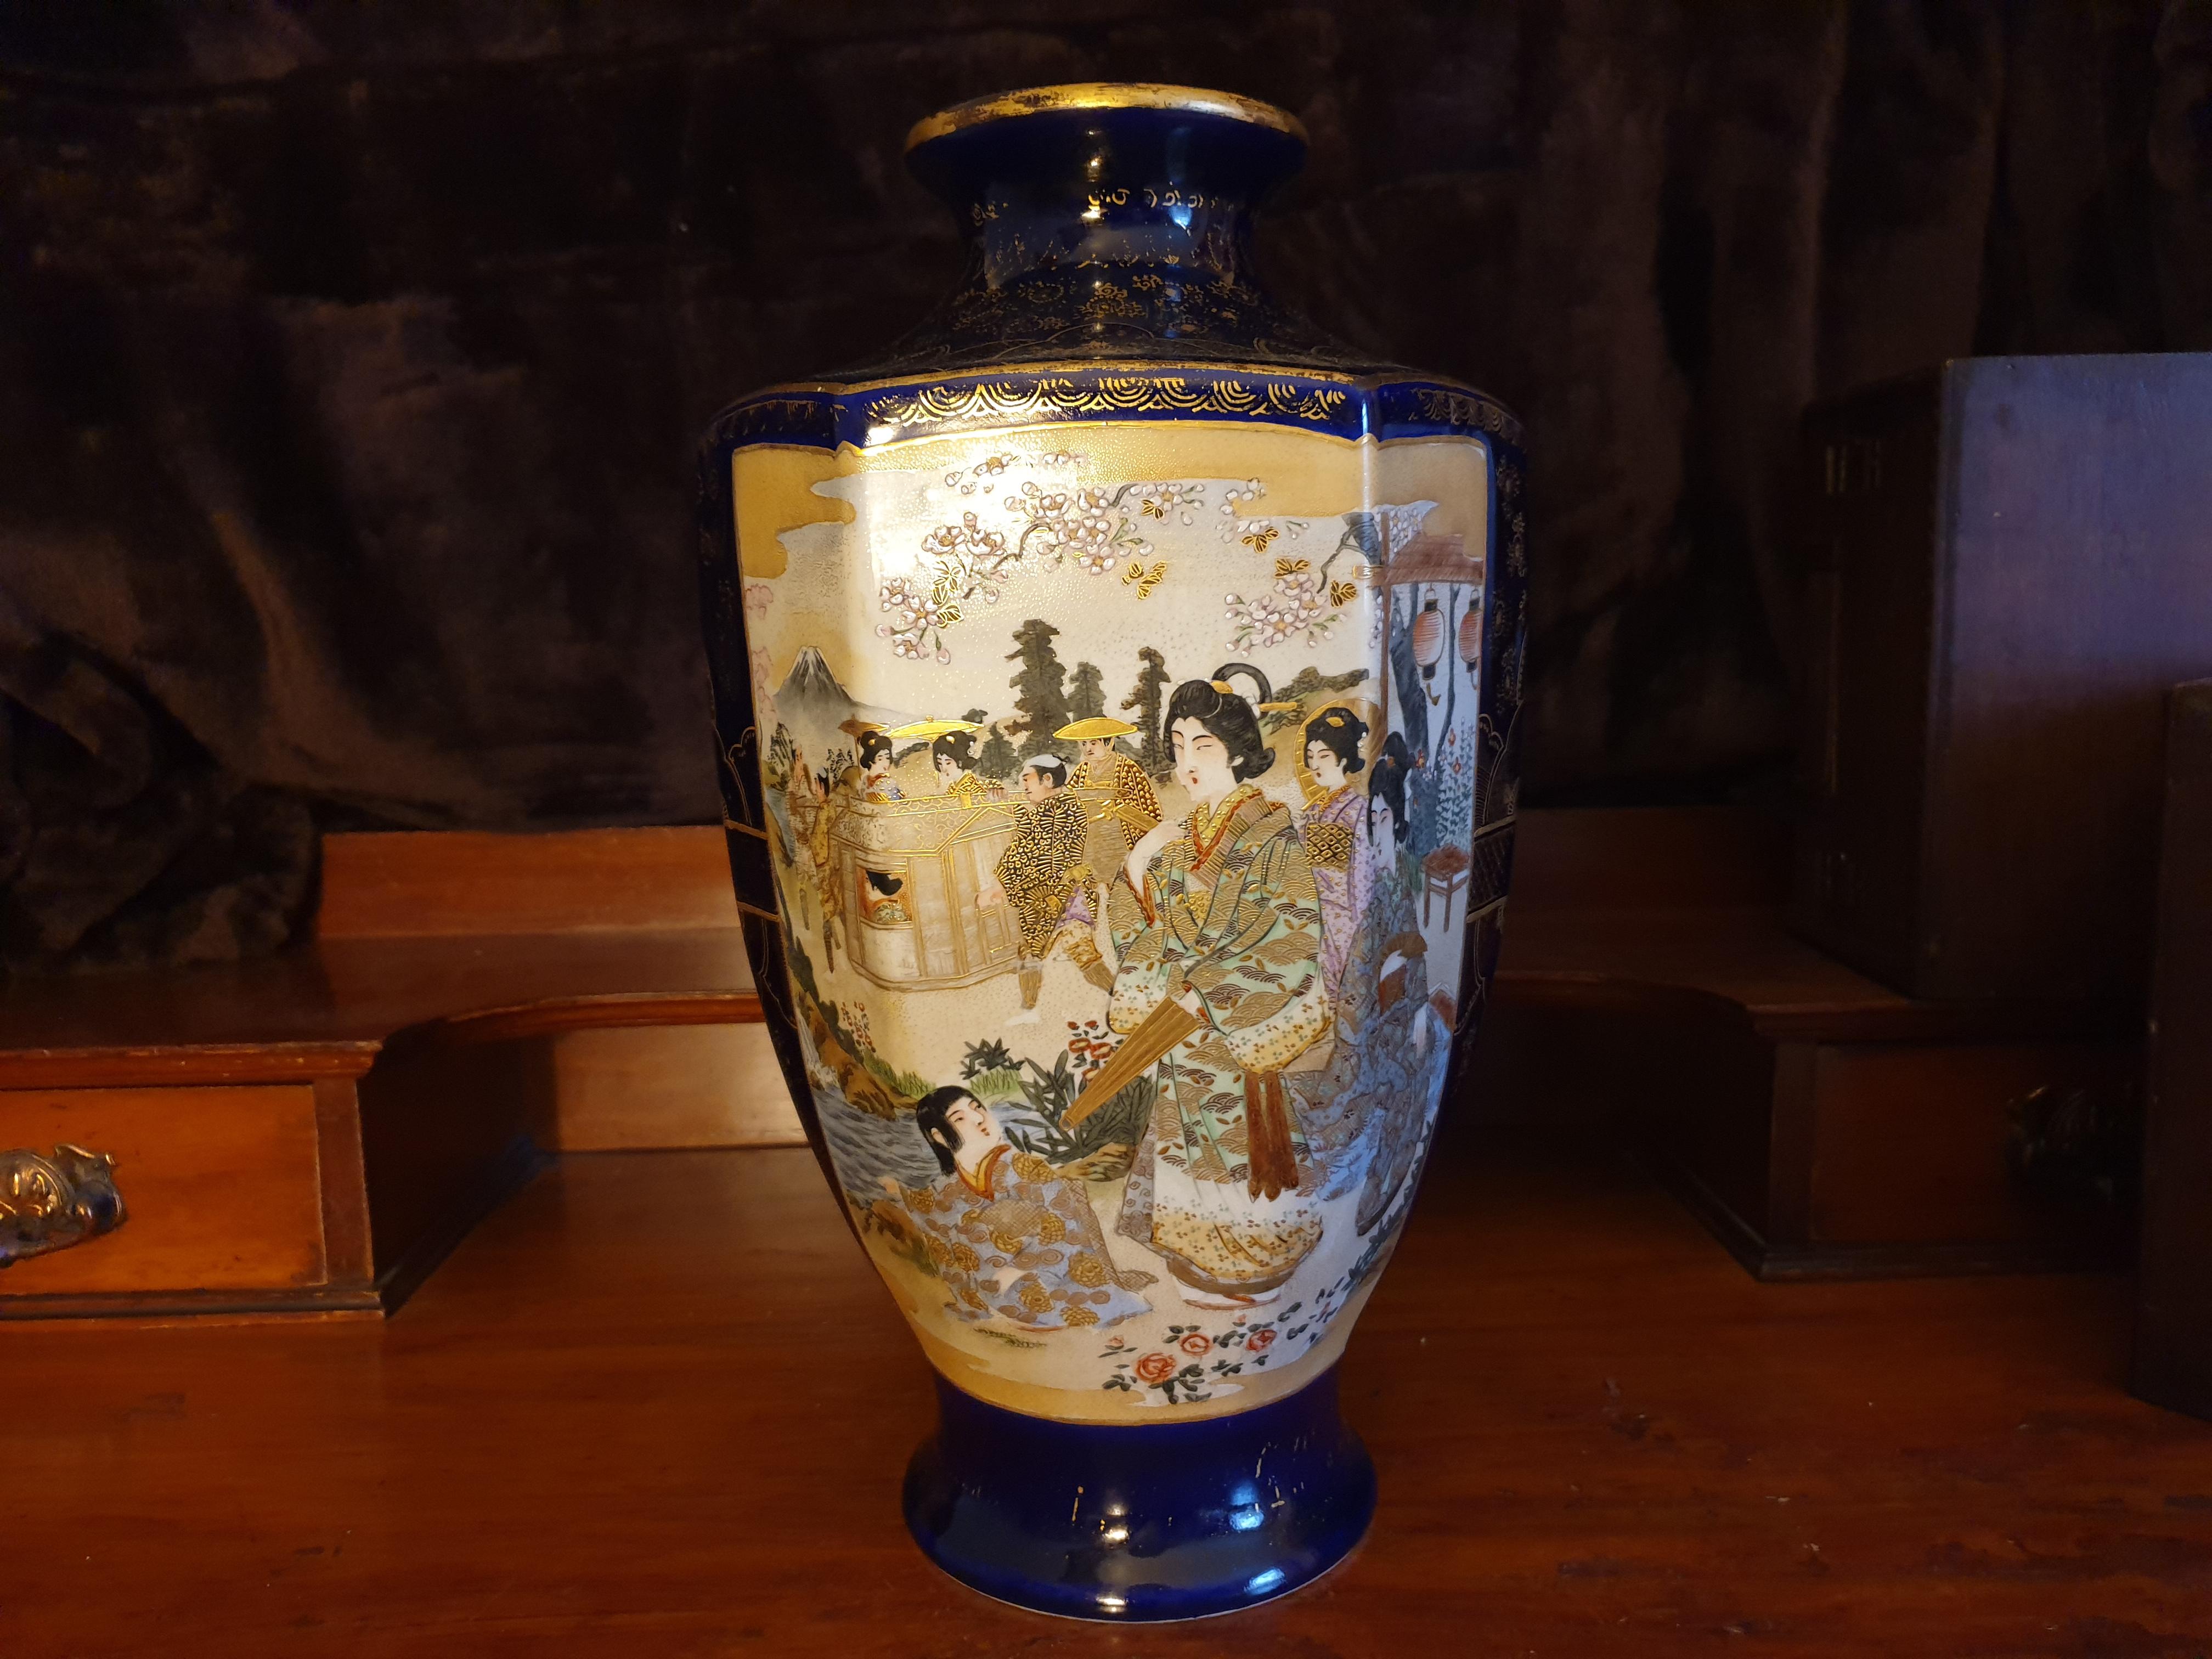 Meiji Period Pair of Japanese Satsuma Vases 19th Century With Imperial Scenes  For Sale 1